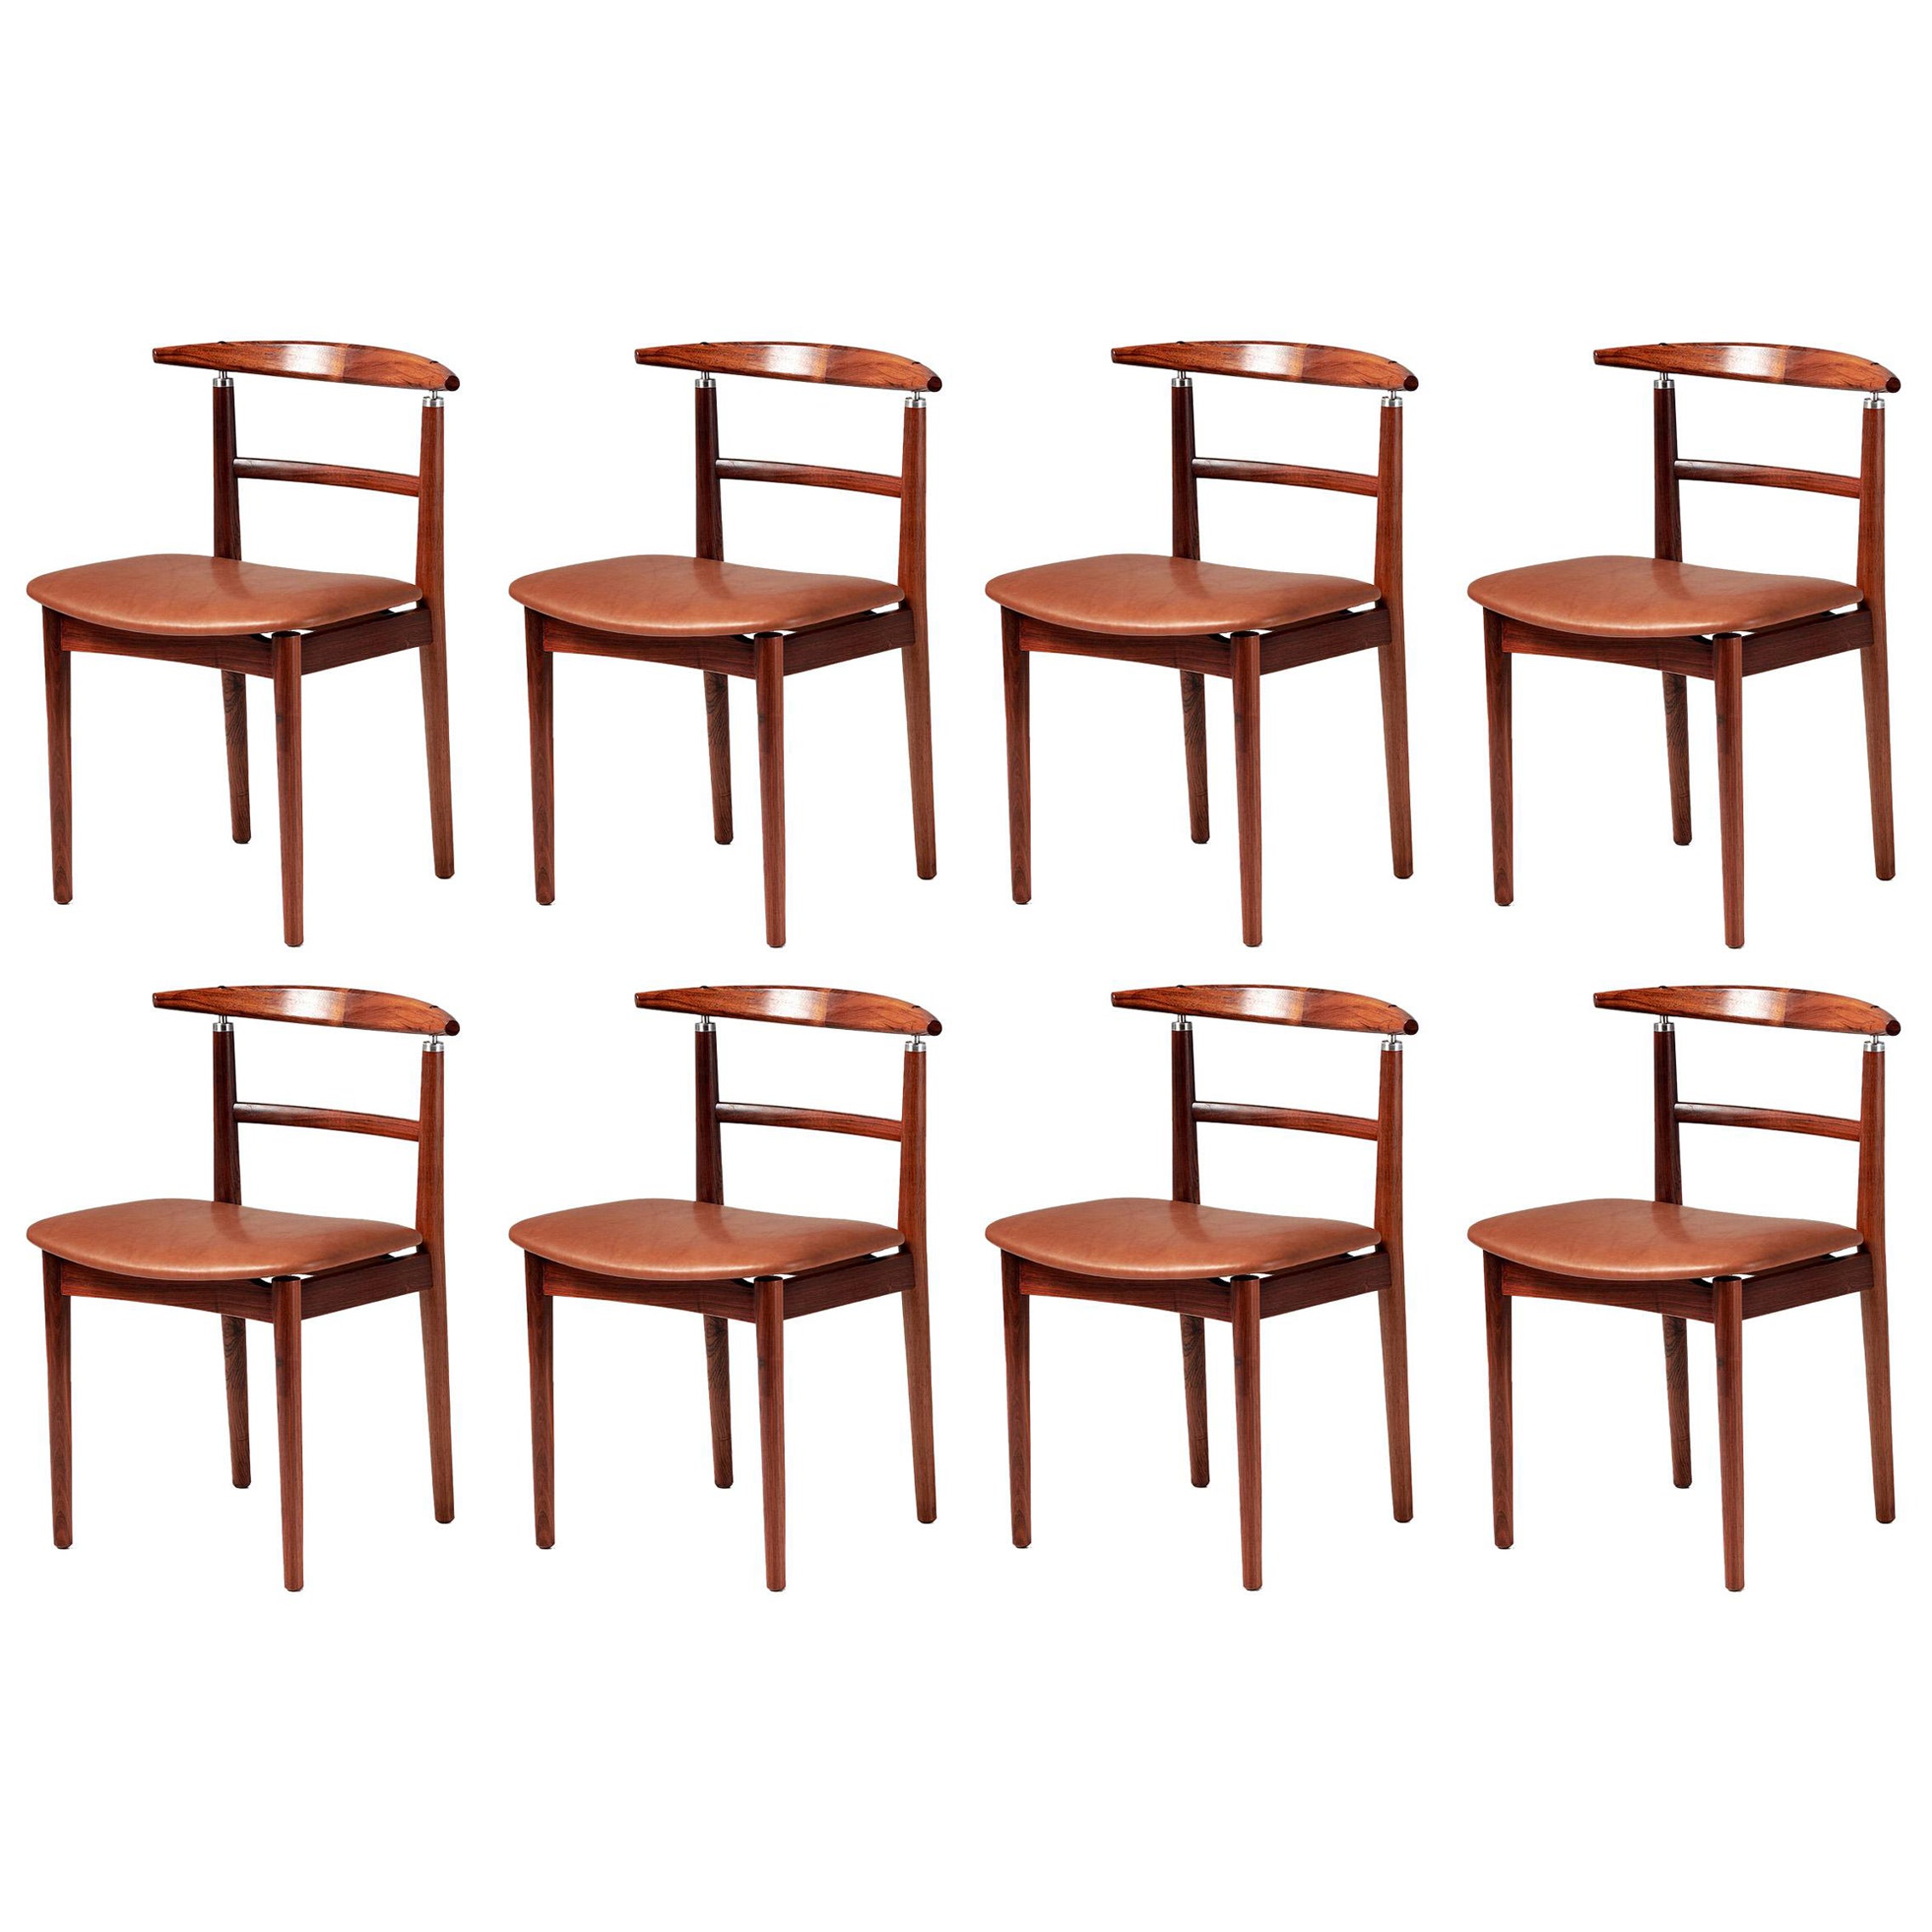 Borge Rammeskov Set of 8 Danish Rosewood Dining Chairs, c1960s For Sale